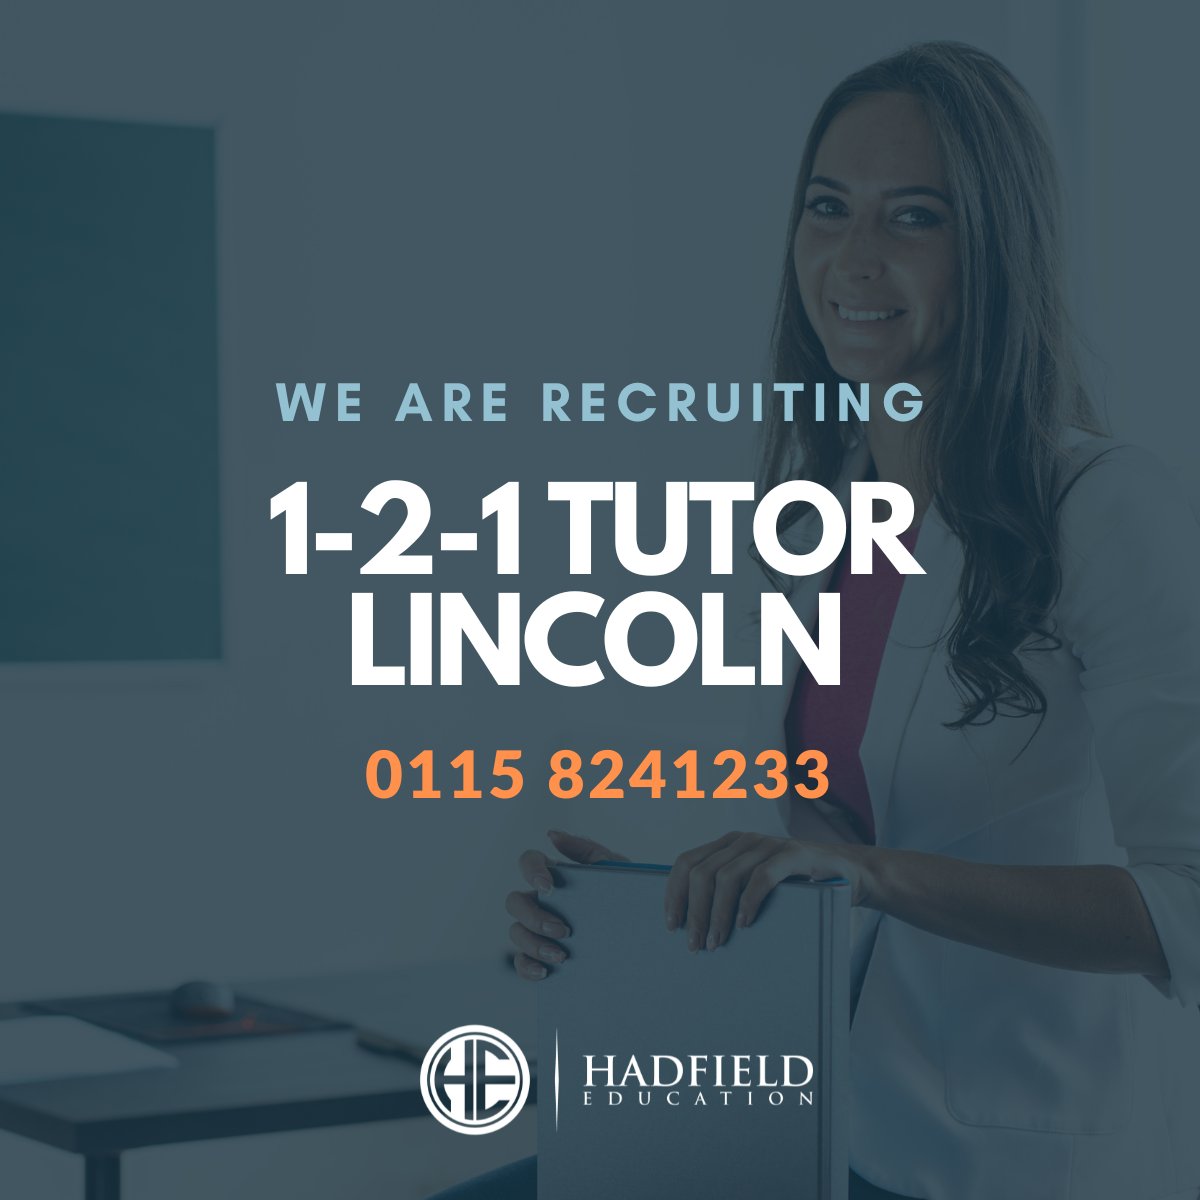 1-2-1 Tutor Jobs in Lincoln
1-2-1 Tutor Job in Lincoln
If you are a 1-2-1 Tutor looking for daily or termly work, this is for you..

bit.ly/3OS5WYX

#1-2-1Tutor
#TeachingAssistant
#HLTA
#TA
#CoverSup
#LearningSupportAssistant
#Lincoln